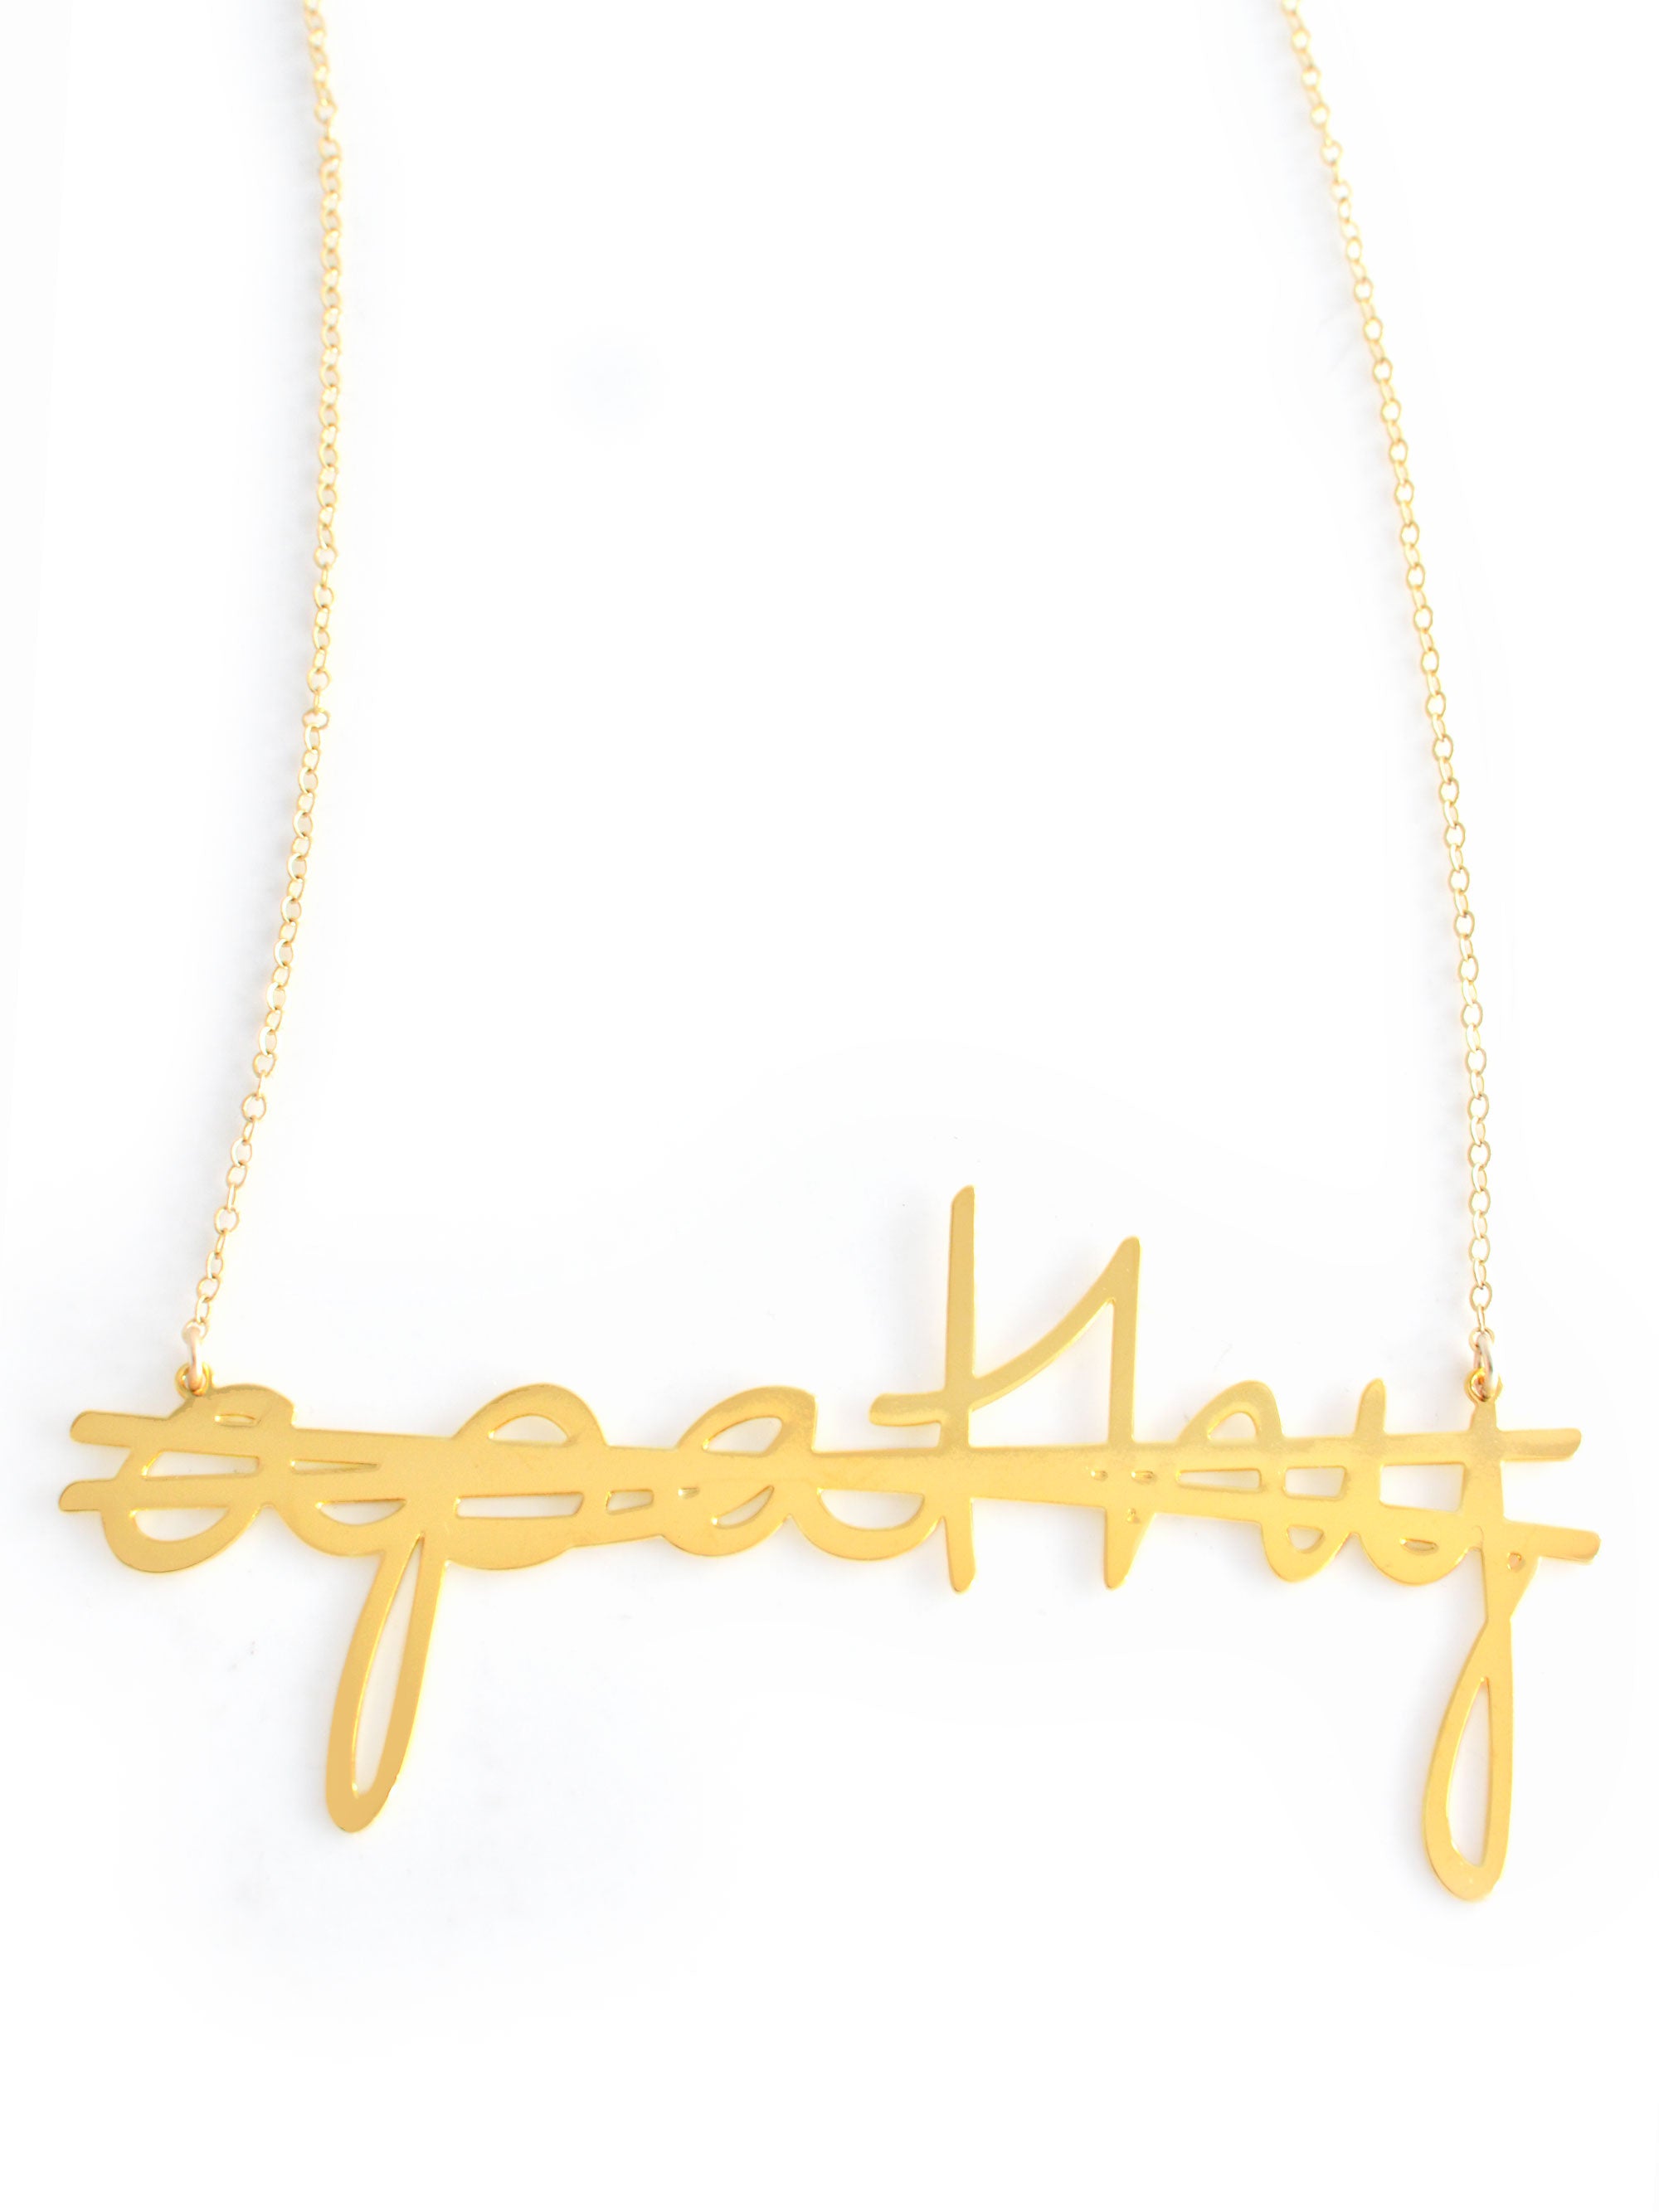 No More Apathy Necklace - High Quality, Affordable, Hand Written, Empowering, Self Love, Mantra Word Necklace - Available in Gold and Silver - Small and Large Sizes - Made in USA - Brevity Jewelry